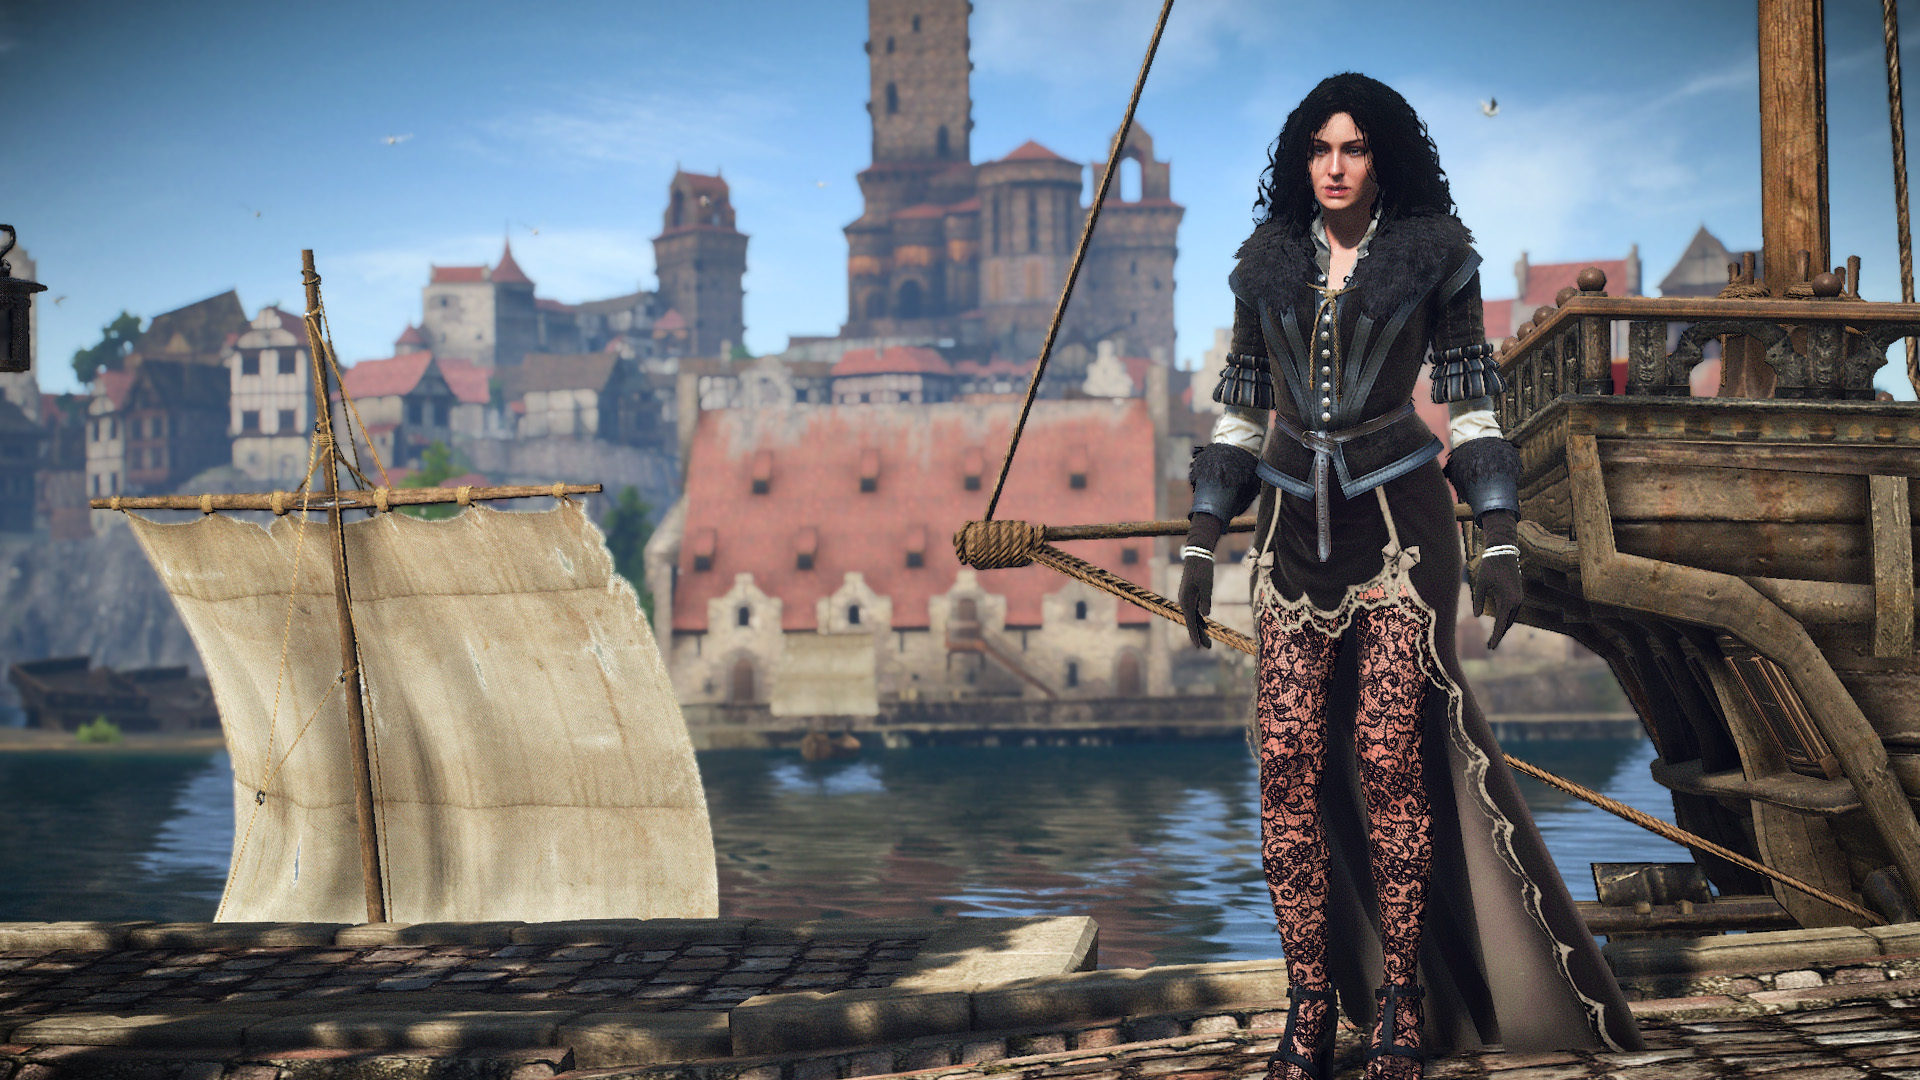 Yennefer of vengerberg the witcher 3 voiced standalone follower se фото 99